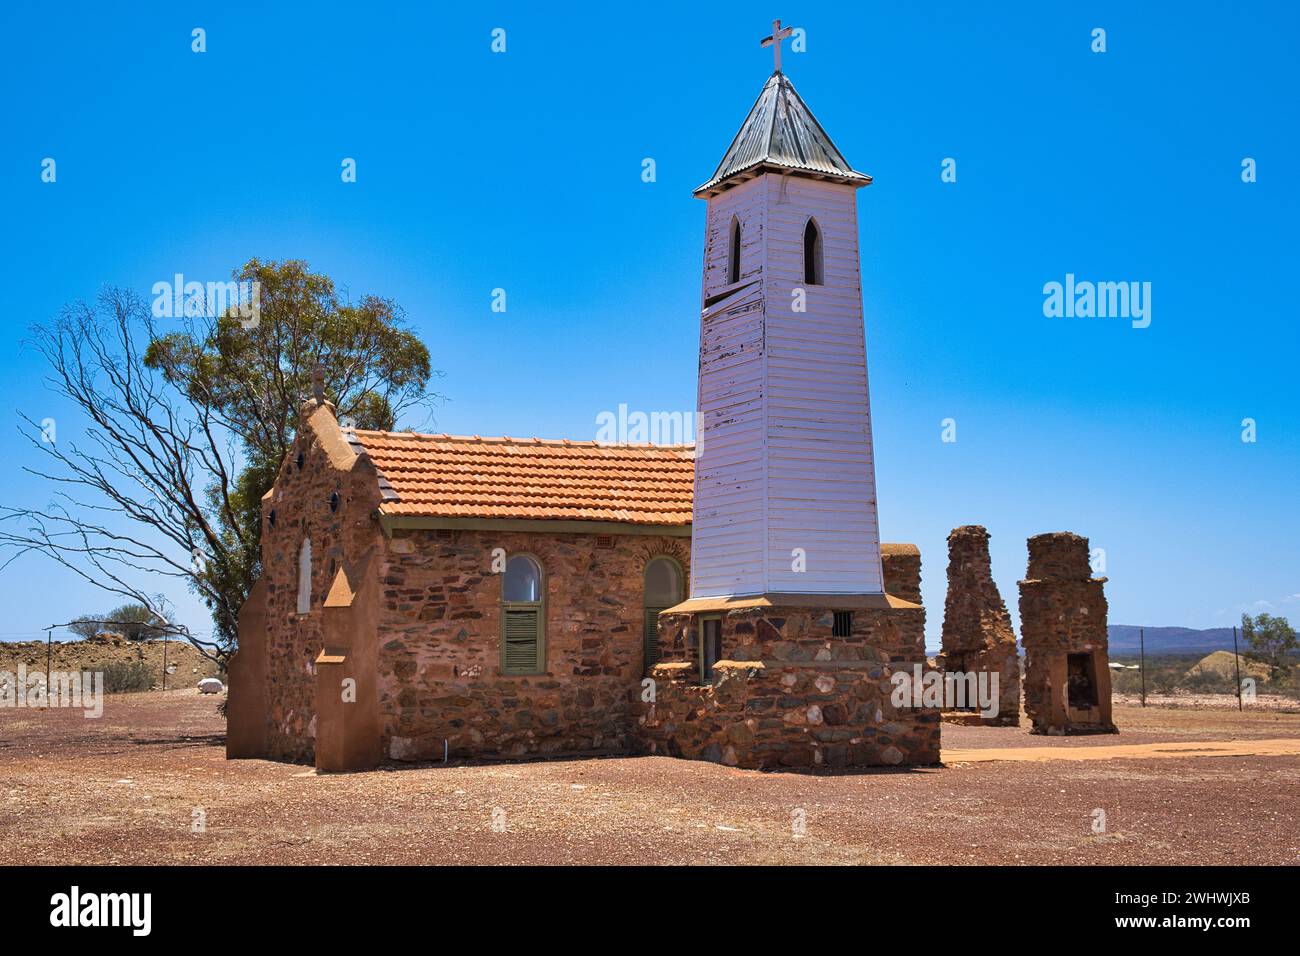 The quaint chapel of St Hyacinth (1922), by architect John Hawes, in Yalgoo, a gold mining town in Western Australia. Stone church, wooden bell tower Stock Photo